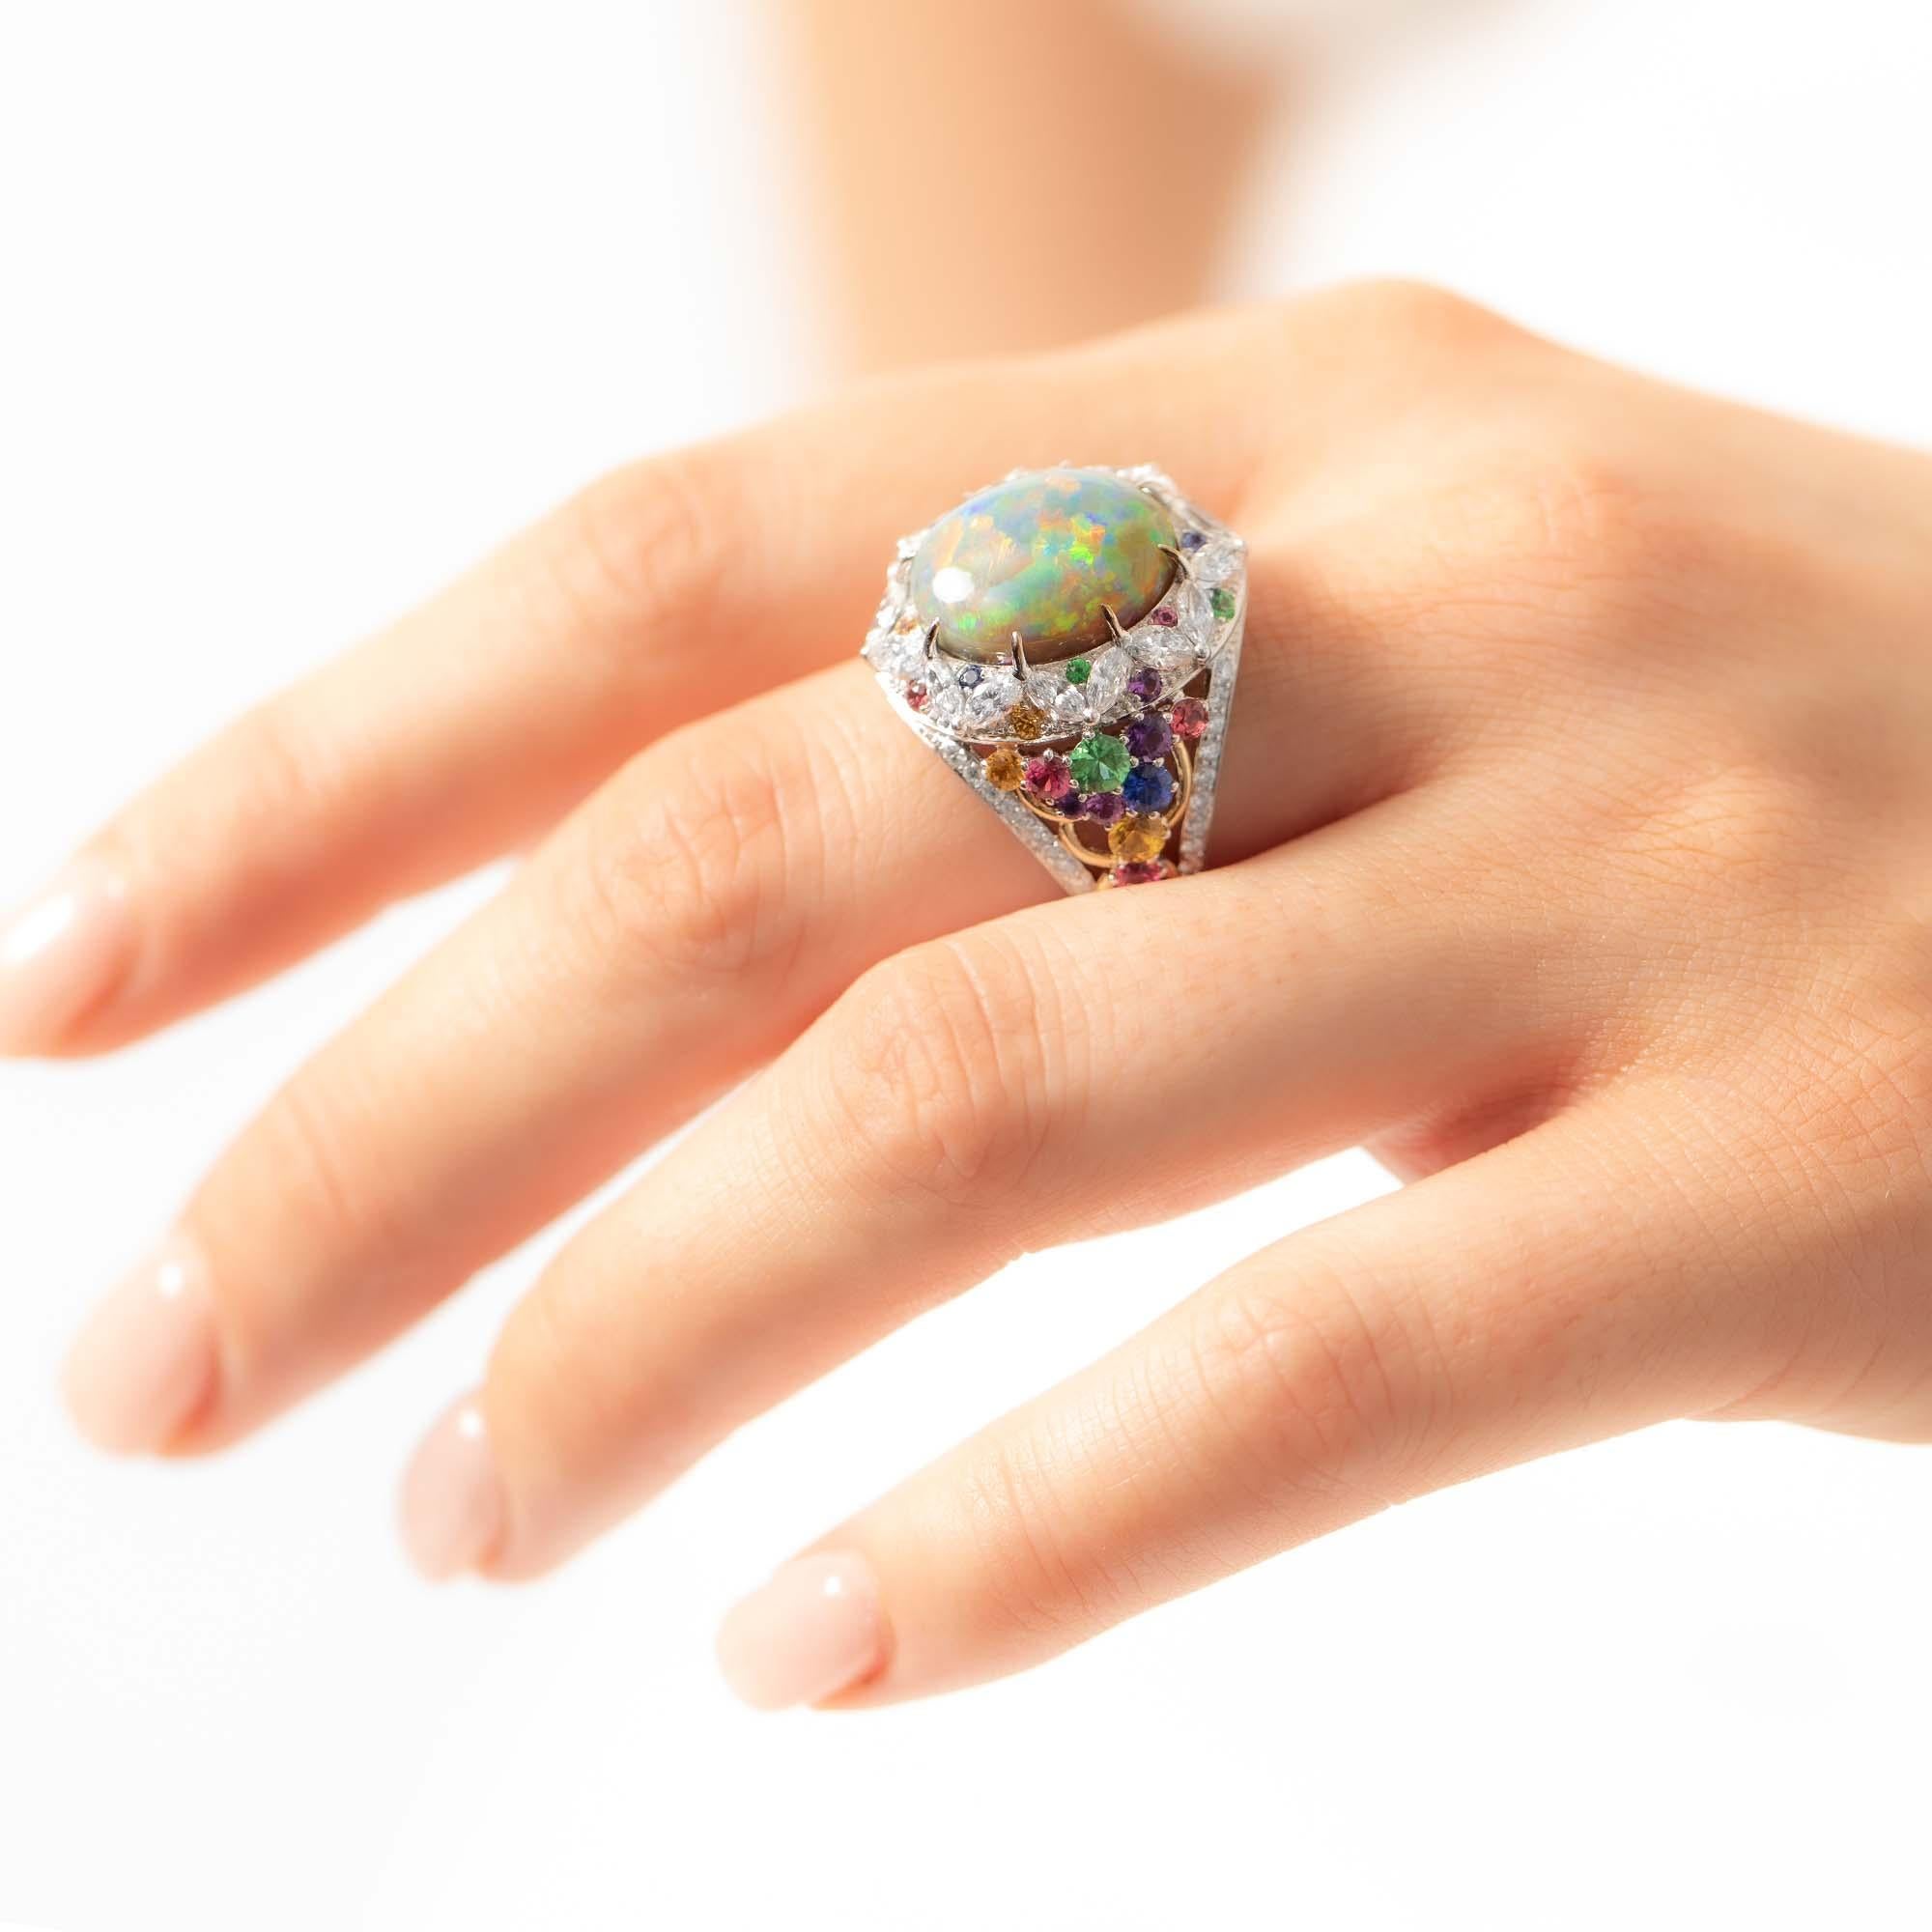 Australian opals are imbued with magic. Their colours, which reach into the soul and move the spirit, reflect all the beauty of the natural world. 

Crafted in an ode to the enchanting wildlife of Australia, this ring depicts one of our most loved